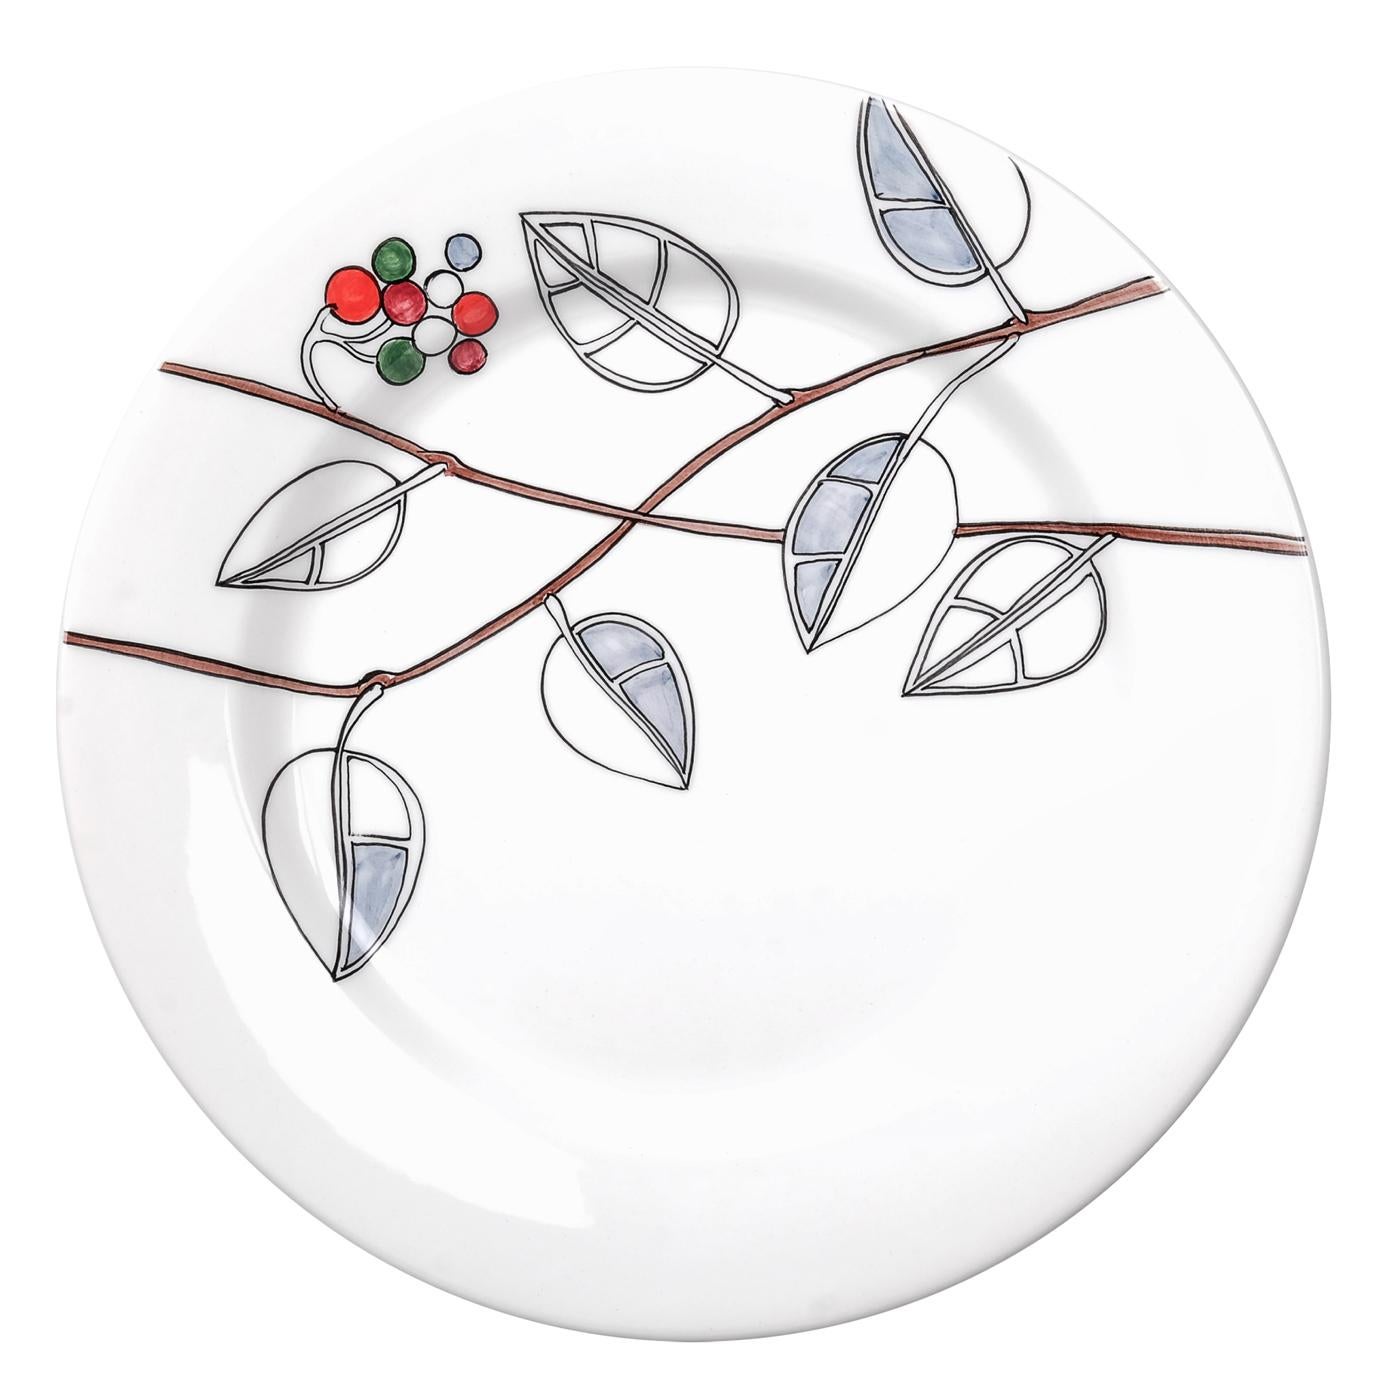 This elegant set of ceramic dinner plates is entirely handcrafted. The elegant white background contrasts perfectly with the 